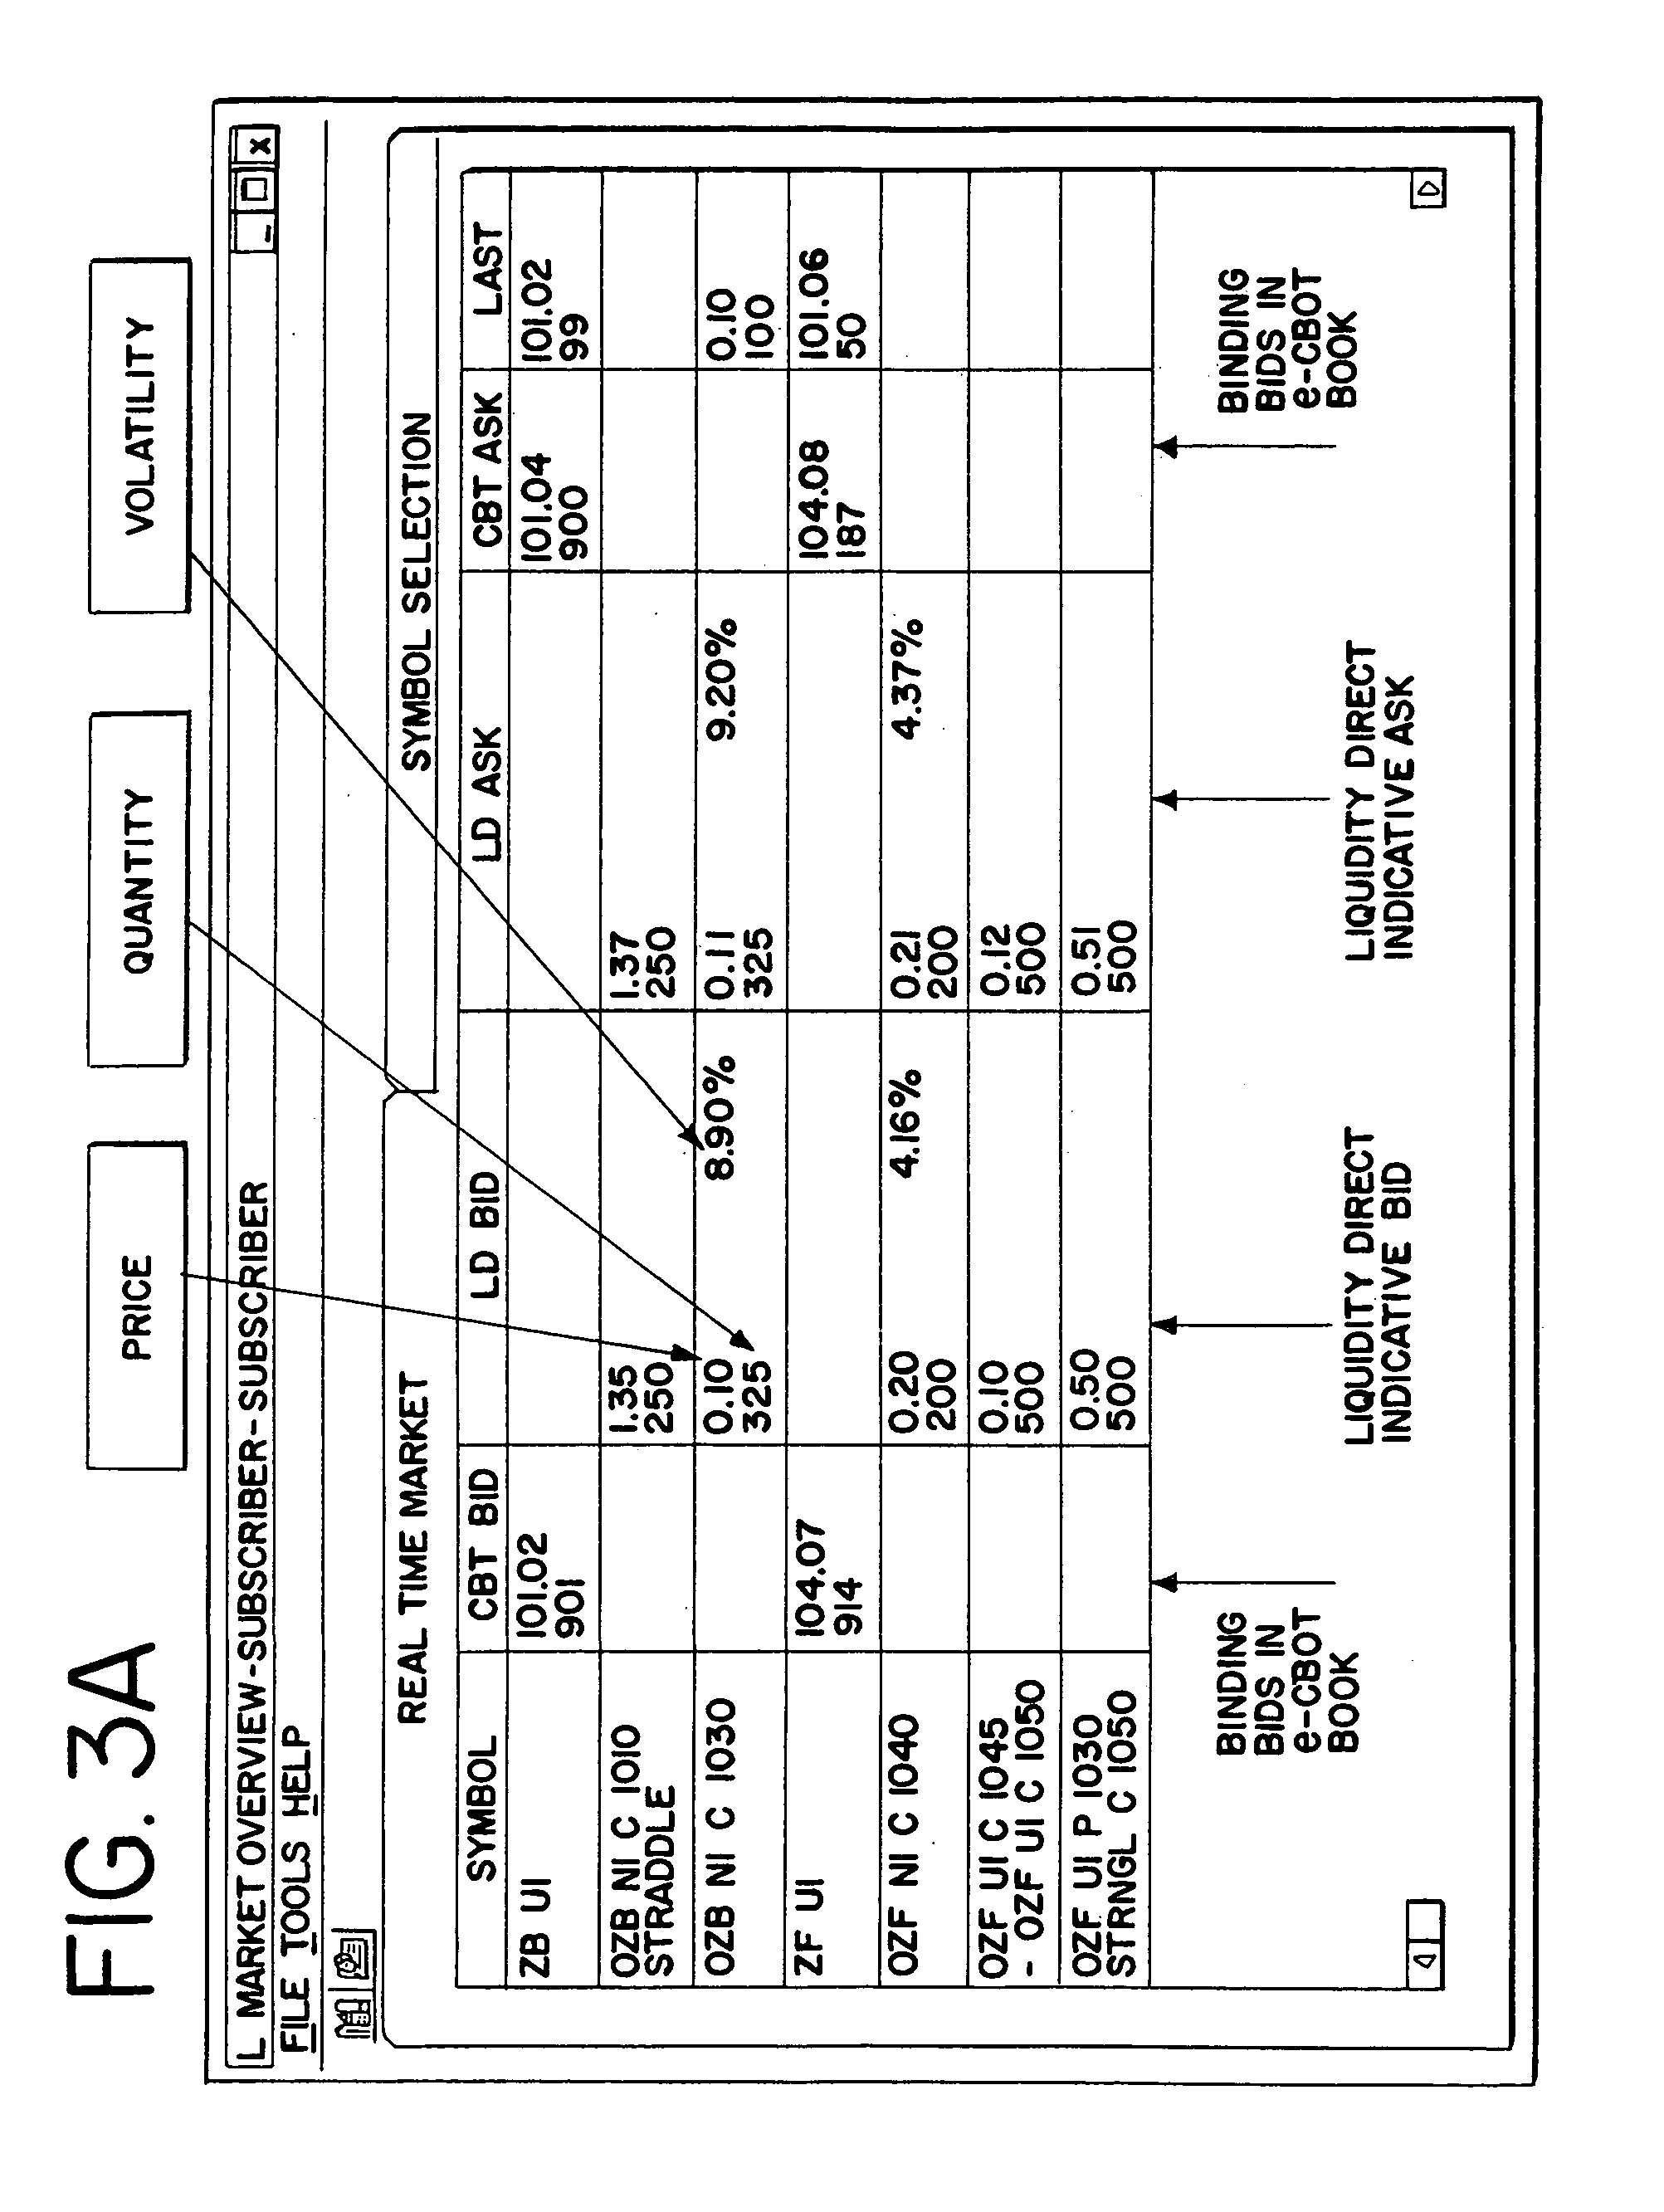 Network and method for trading derivatives by providing enhanced RFQ visibility